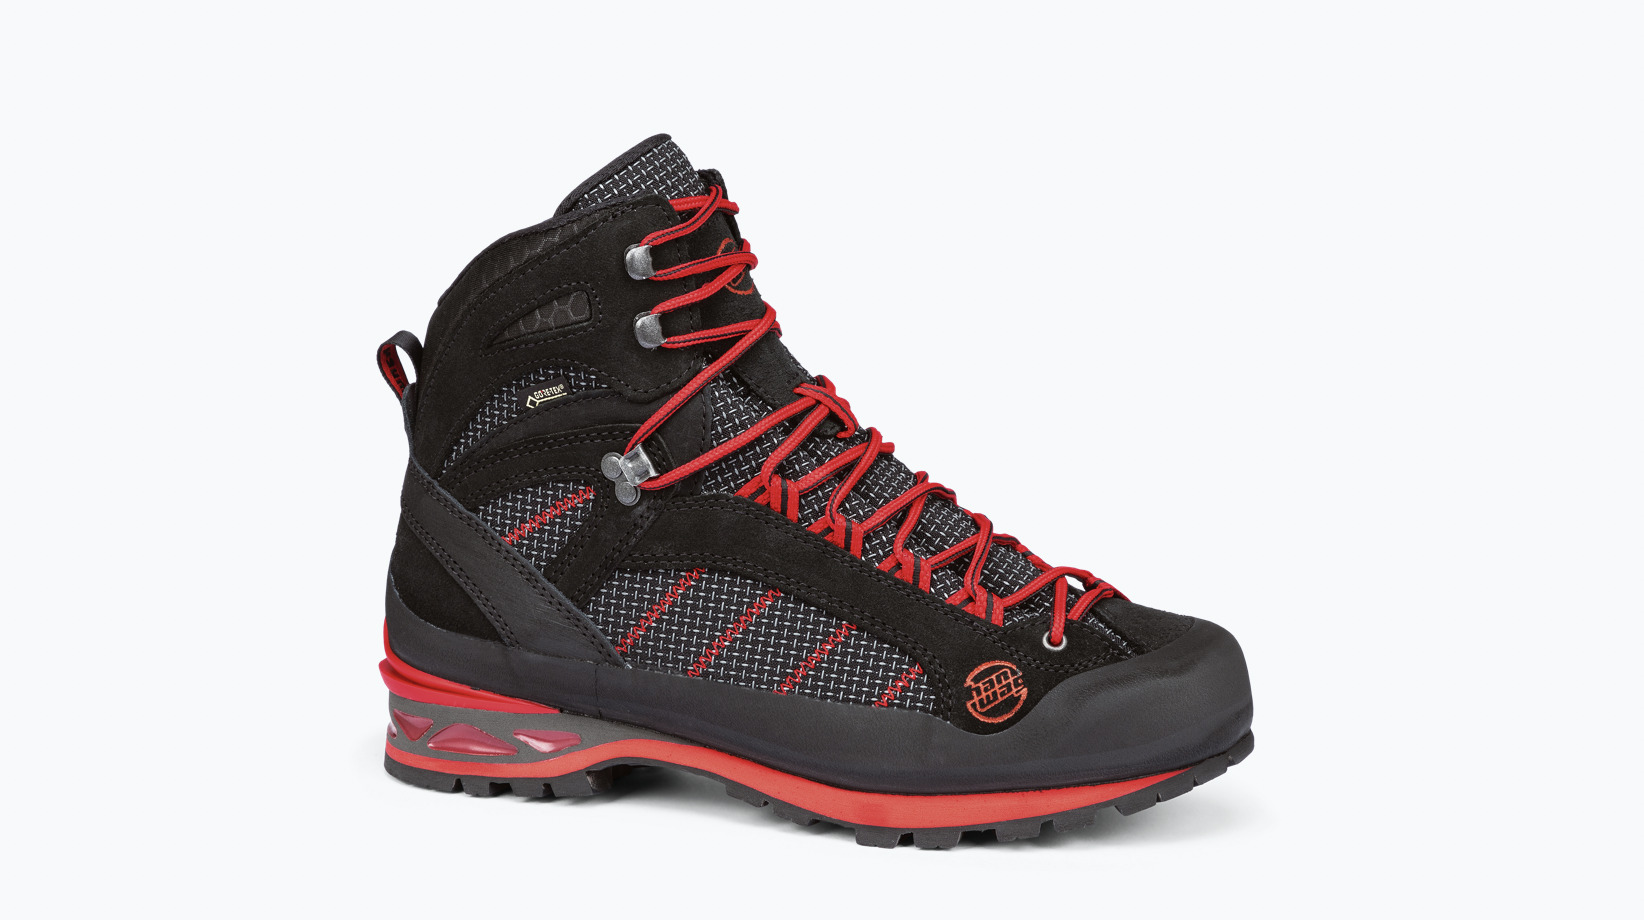 Winter mountaineering boots: 9 of the best reviewed - TGO Magazine